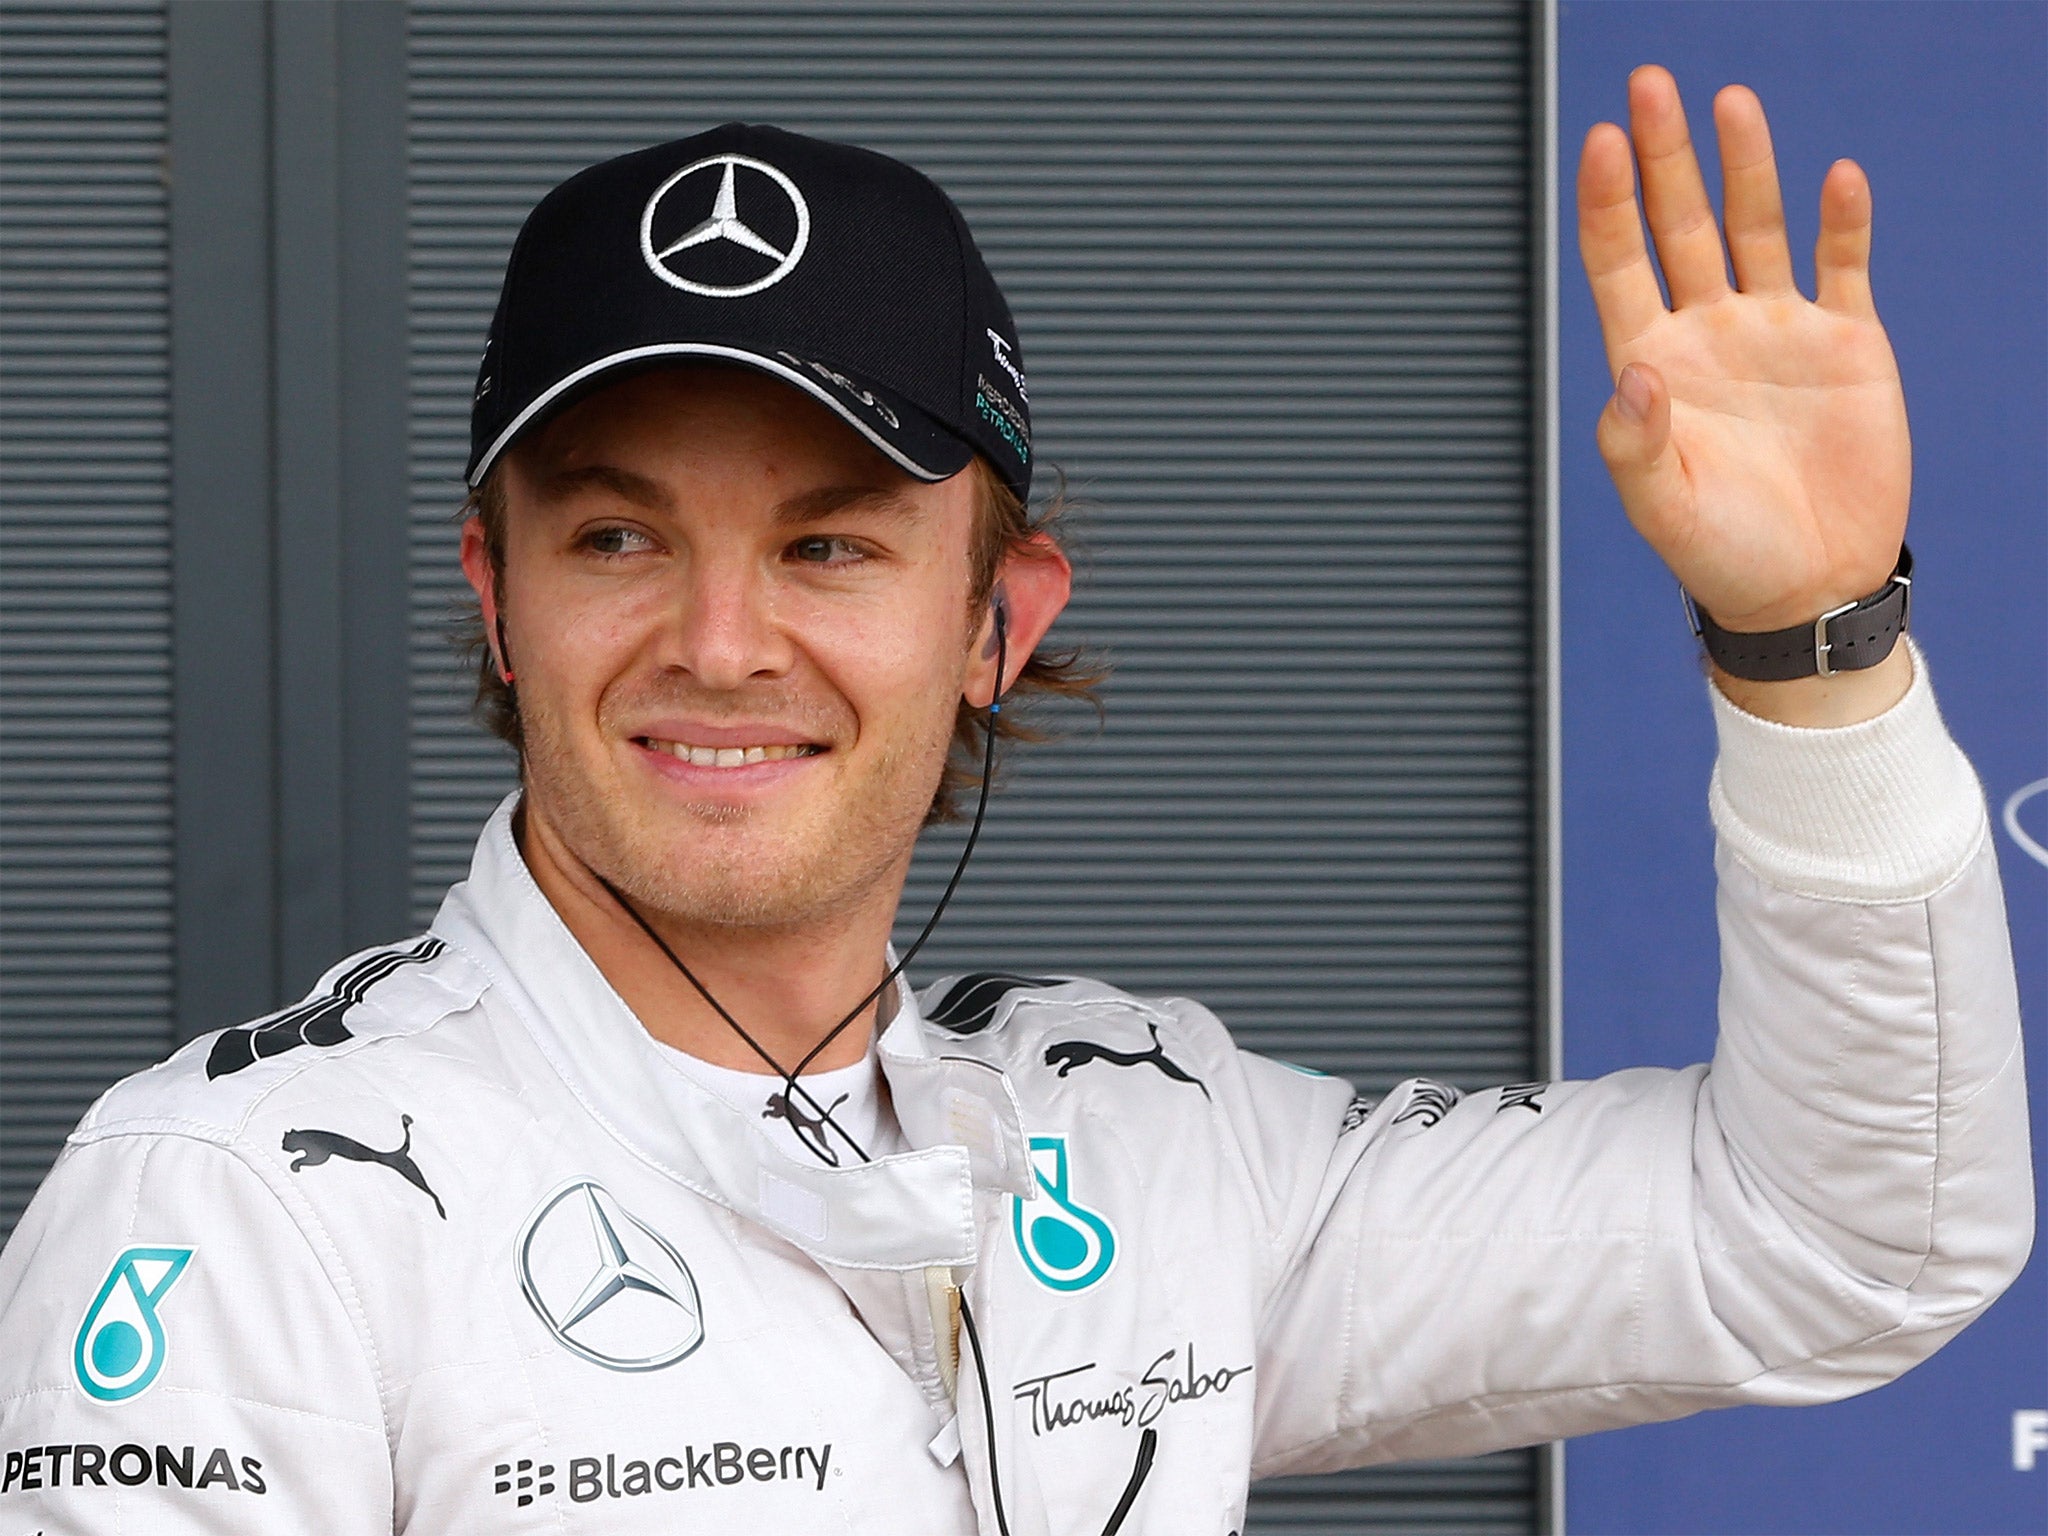 Nico Rosberg has signed a multi-year contract extension at Mercedes